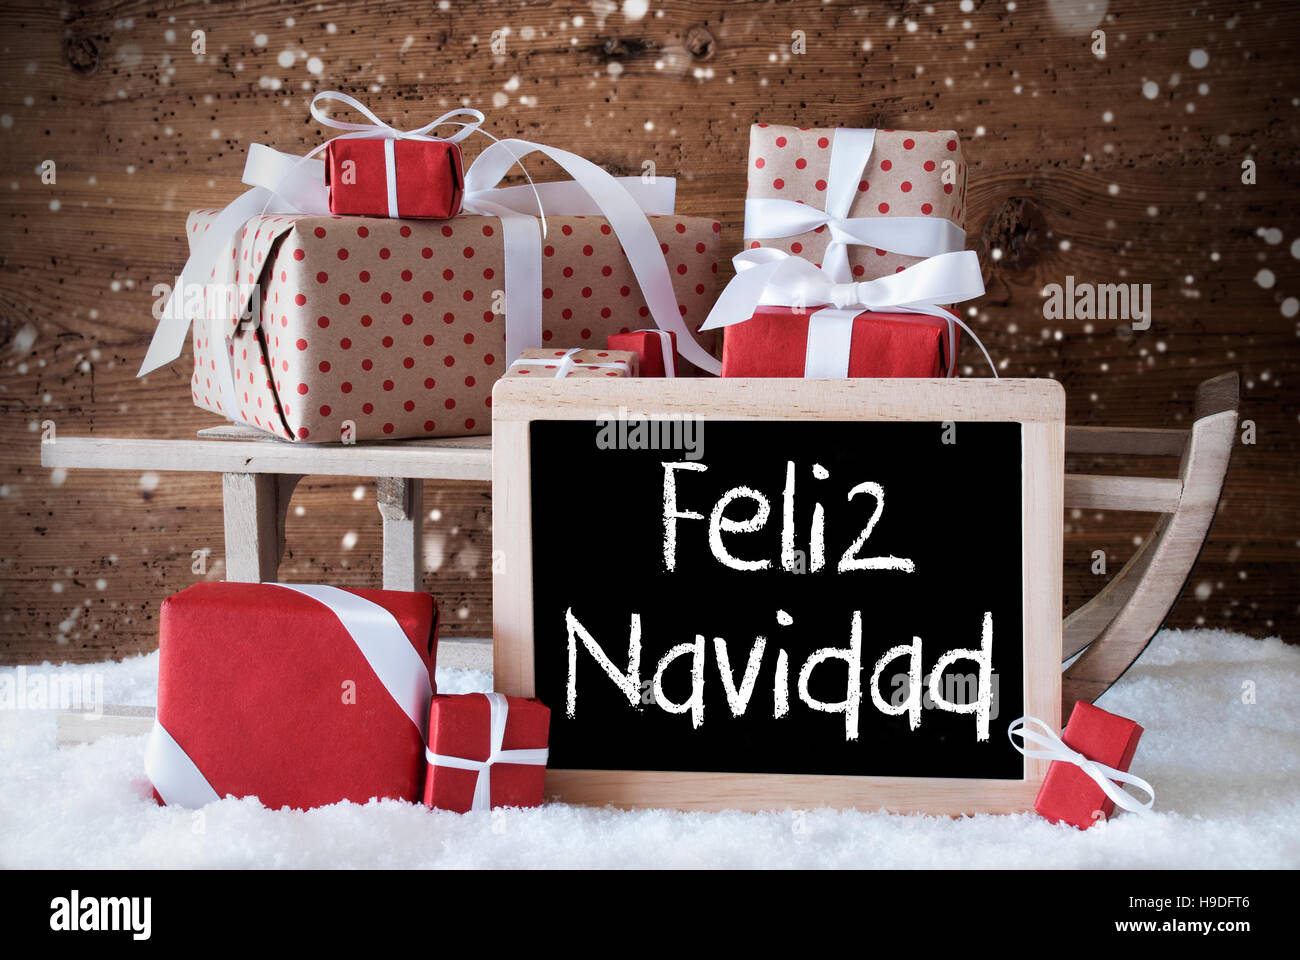 Sleigh With Gifts, Snow, Snowflakes, Feliz Navidad Means Merry Christmas Stock Photo